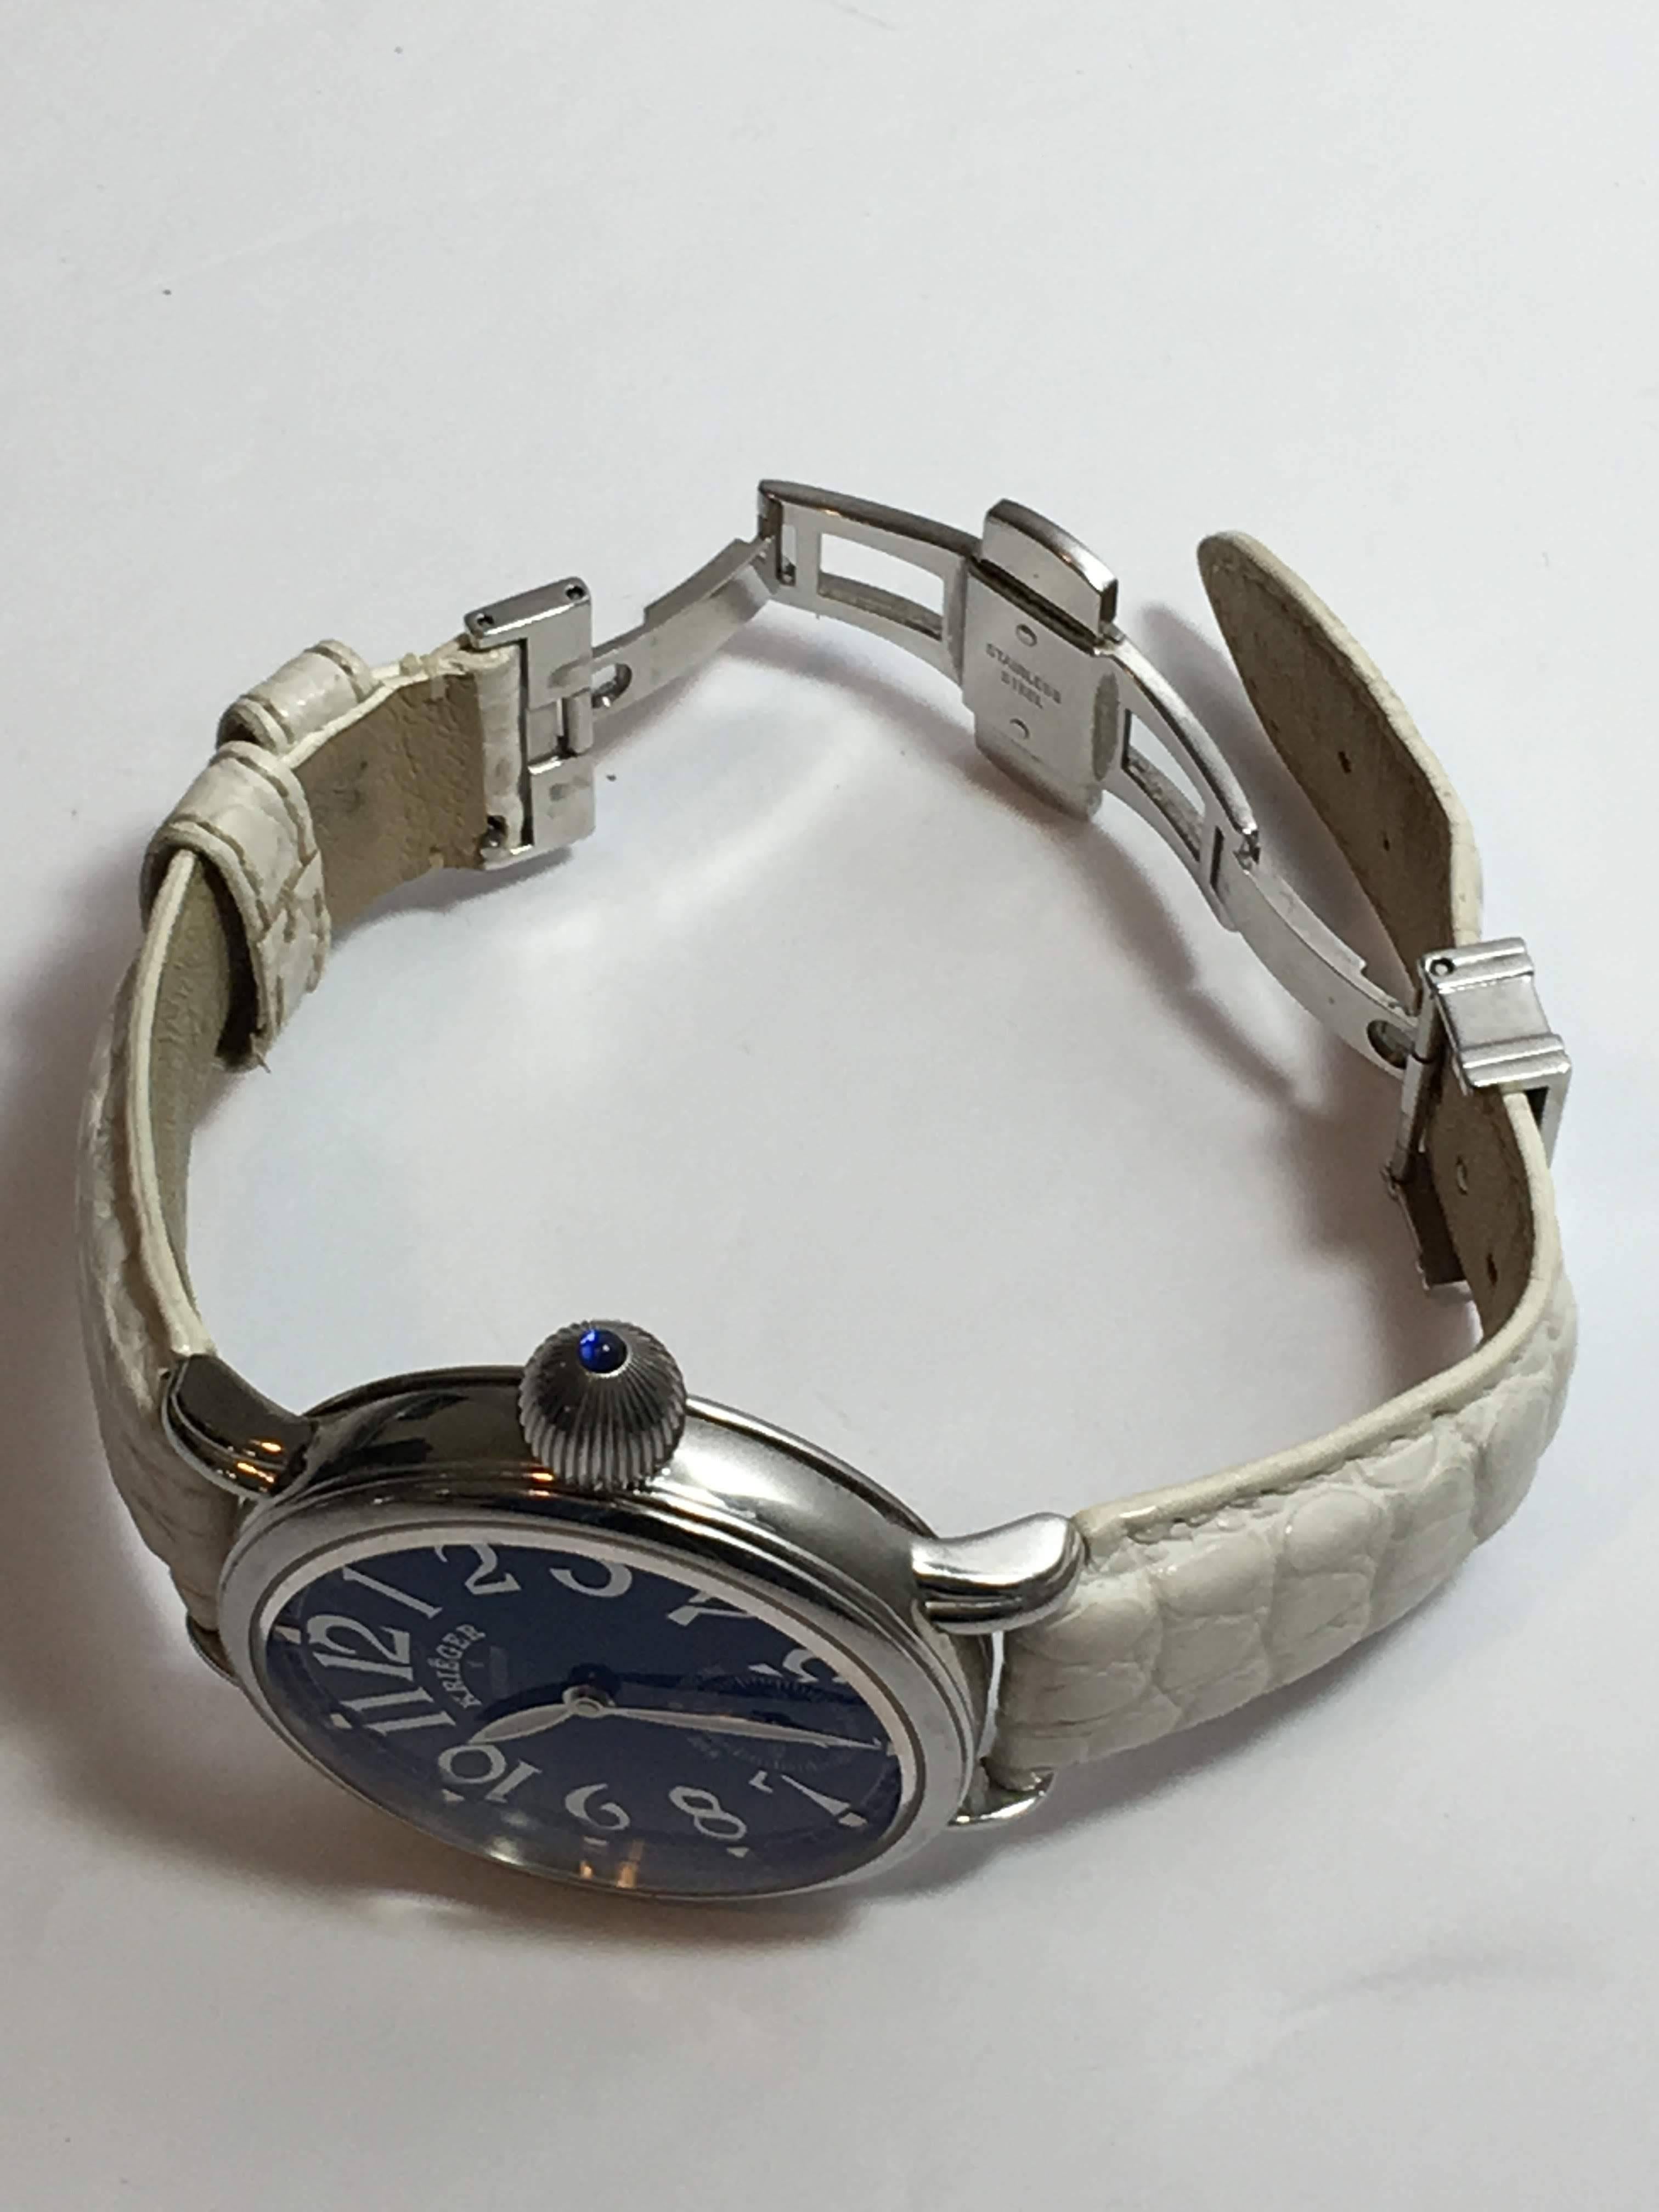 Round Blue-Face Dial Watch with White Crocodile Wrist Band, Silver Hardware. Exposed Dial at Back of Watch.